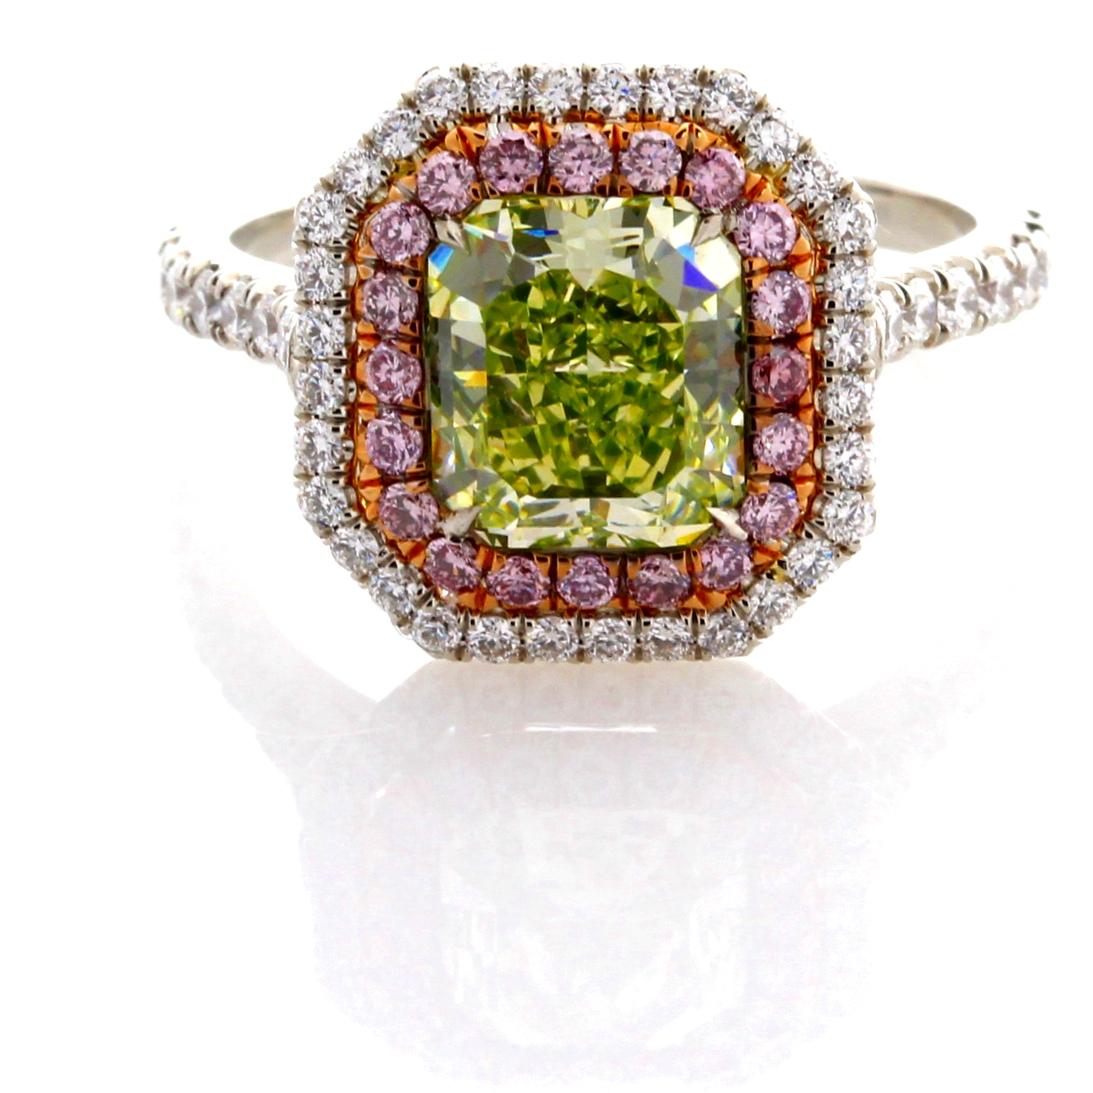 Incredible Deal on GIA Certified 2.07 Carat Radiant Cut, Natural Fancy Green-Yellow Even VS1 Clarity, Diamond Ring, measuring 7.64-6.74x4.42. Total Carat Weight on the ring is 2.87.
GIA CERTIFICATE #2185107705.  
This incredible setting was custom